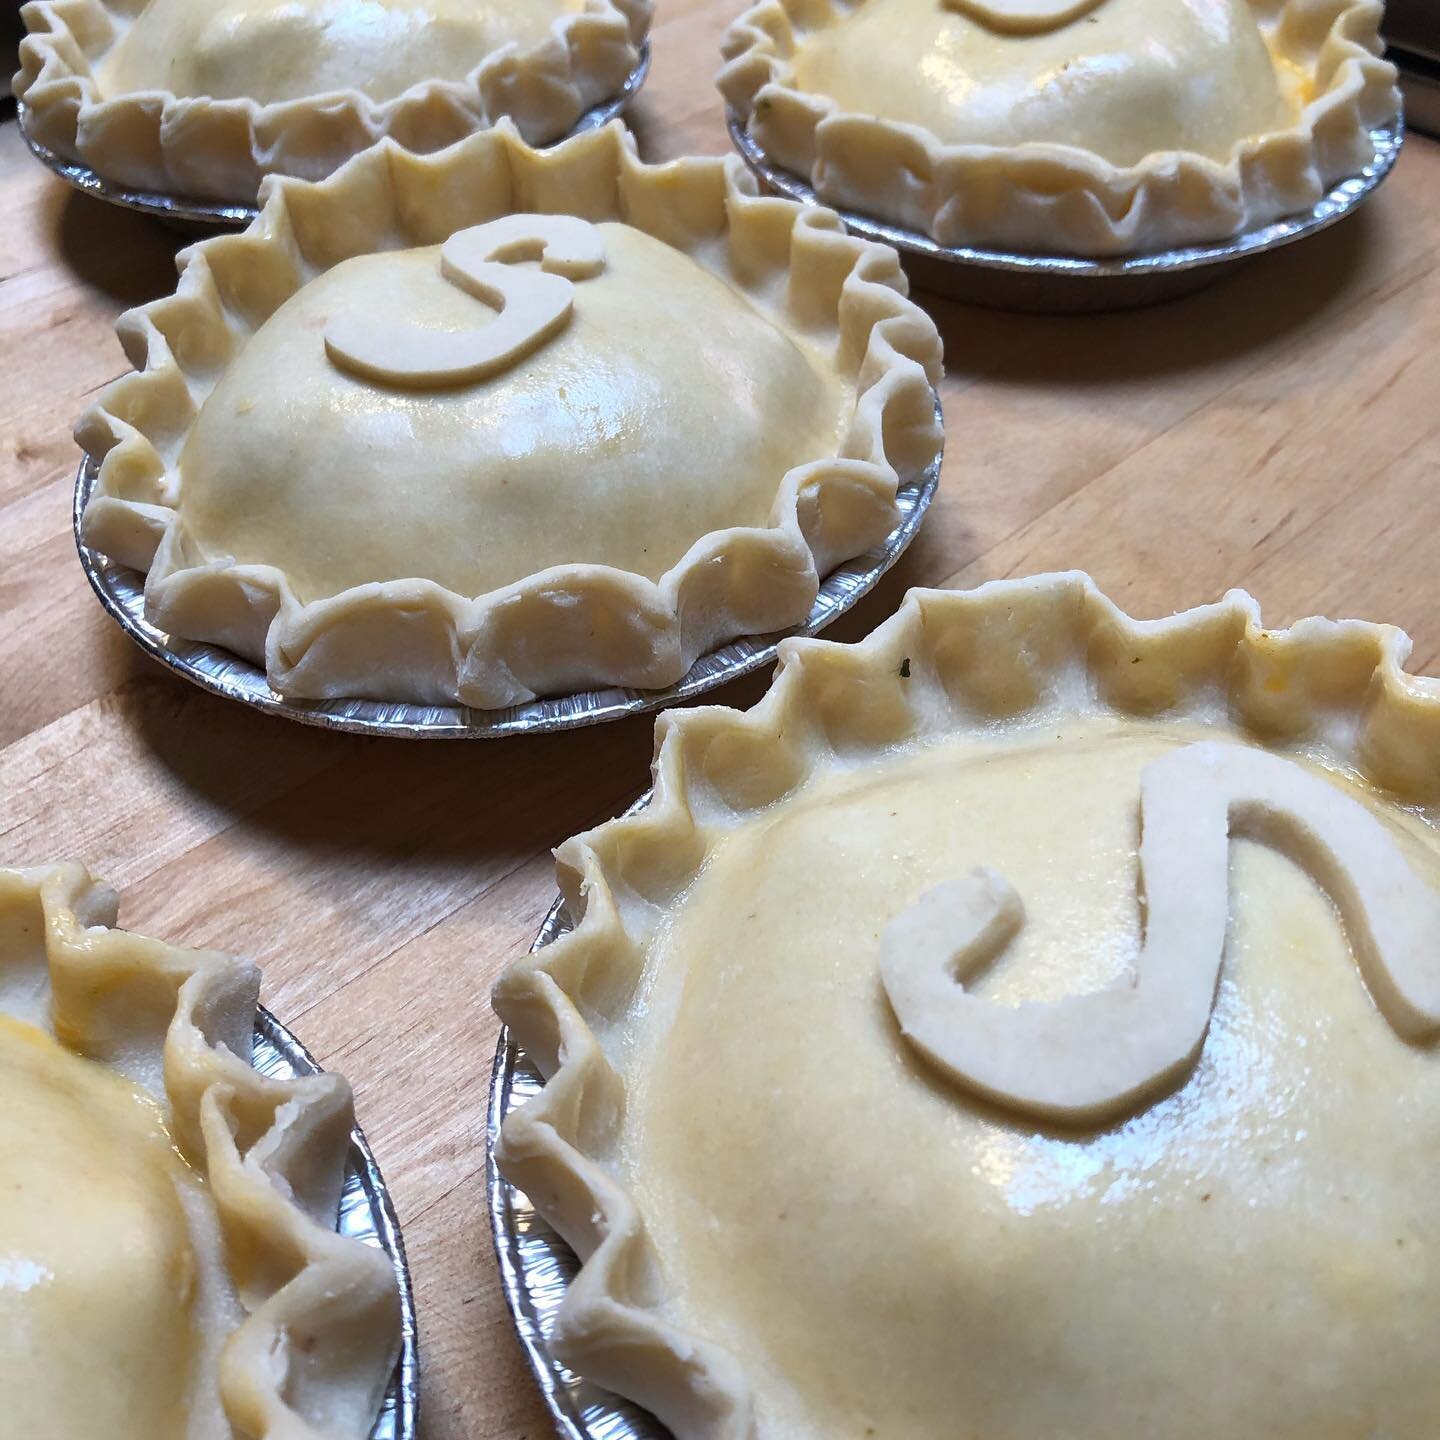 #trysomethingnew #cheese #pies #chips #snacks #countrystore #groceryshopping #grocerystore  #pnw #penderisland #specialty #handmadeforyou  We do lots of stuff in house ourselves including a variety of pies for you to take home and bake yourself.  #ha